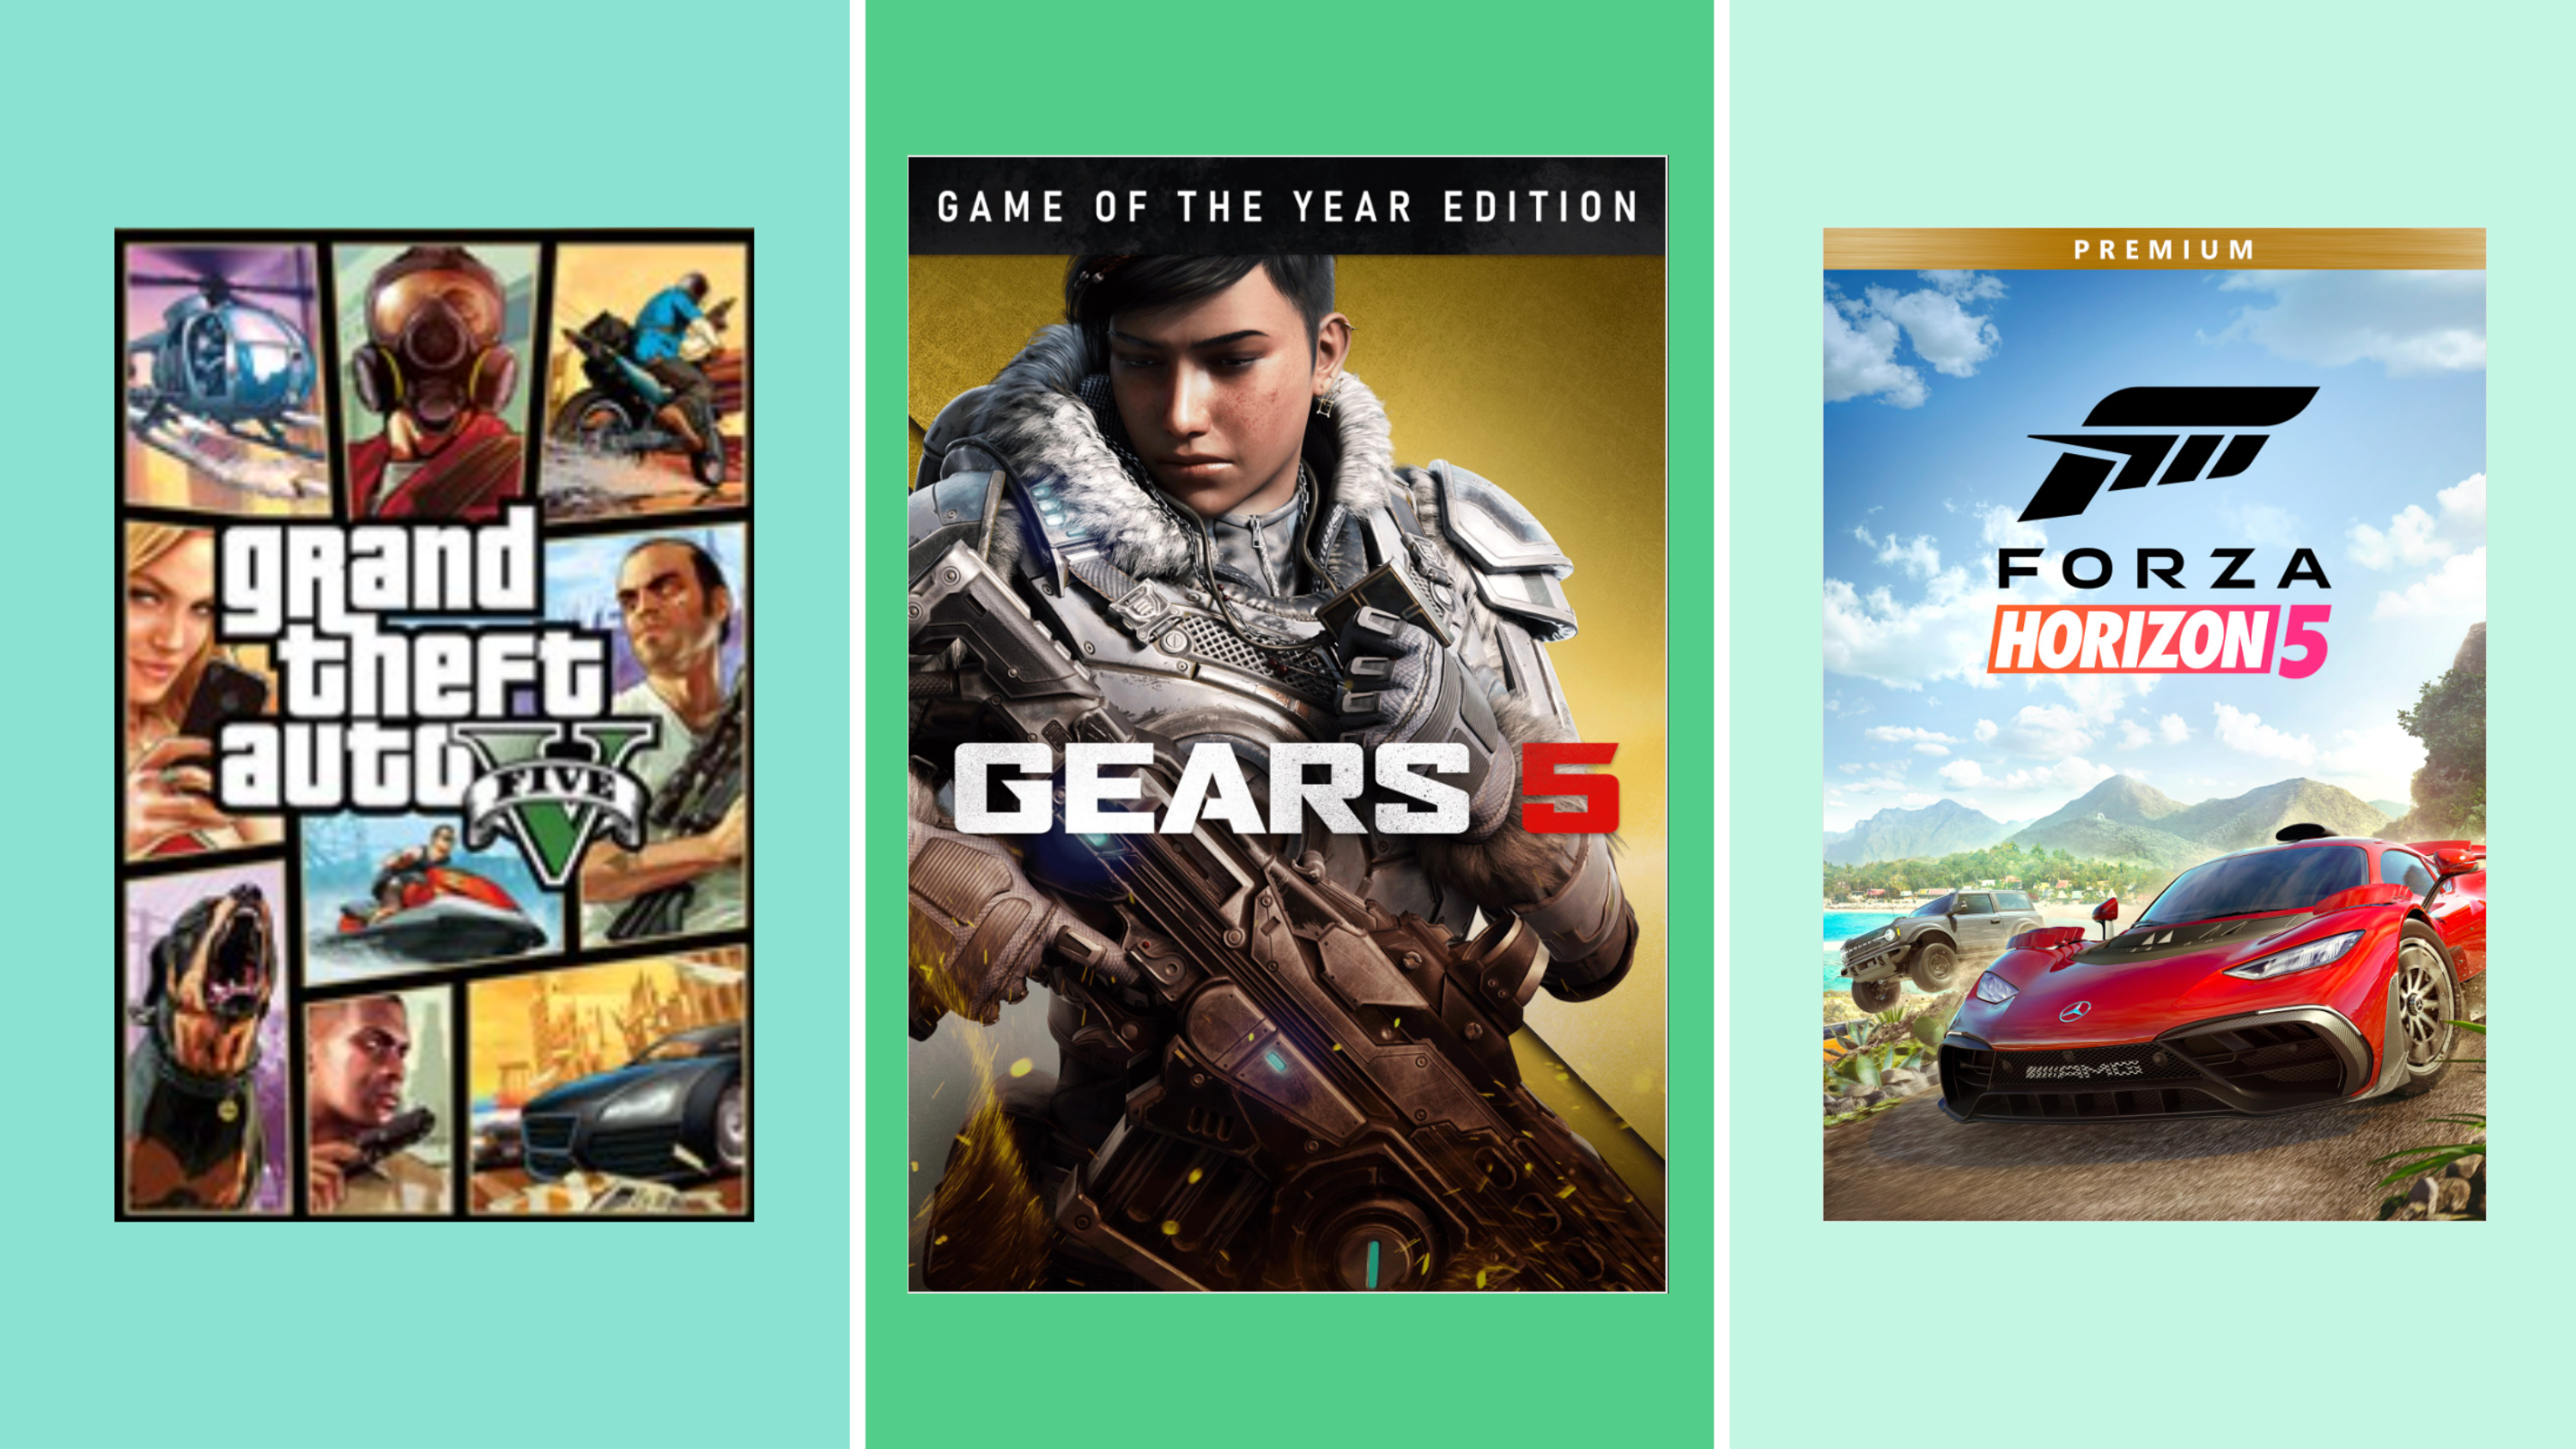 Shop the Xbox Deals Unlocked sale to save up to 80% on Xbox video games now